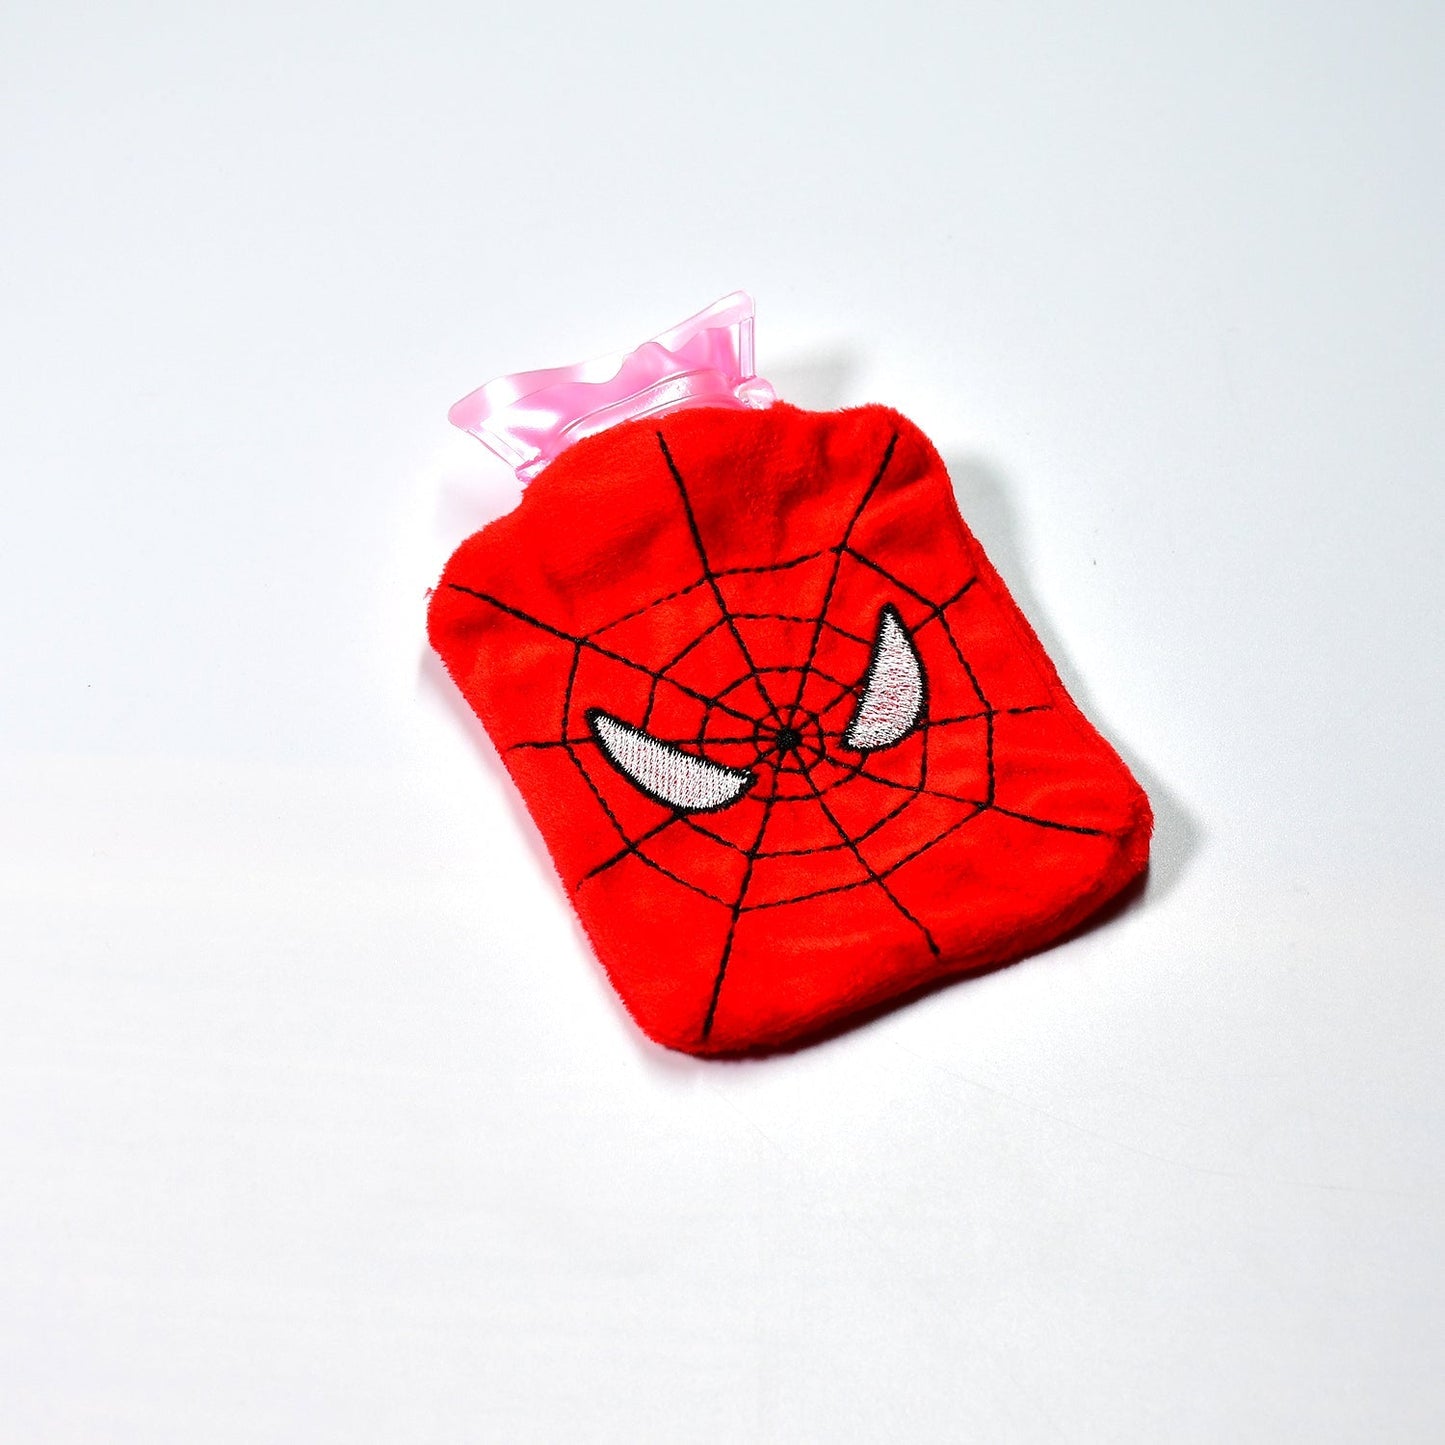 Spiderman small Hot Water Bag with Cover for Pain Relief, Neck, Shoulder Pain and Hand, Feet Warmer, Menstrual Cramps